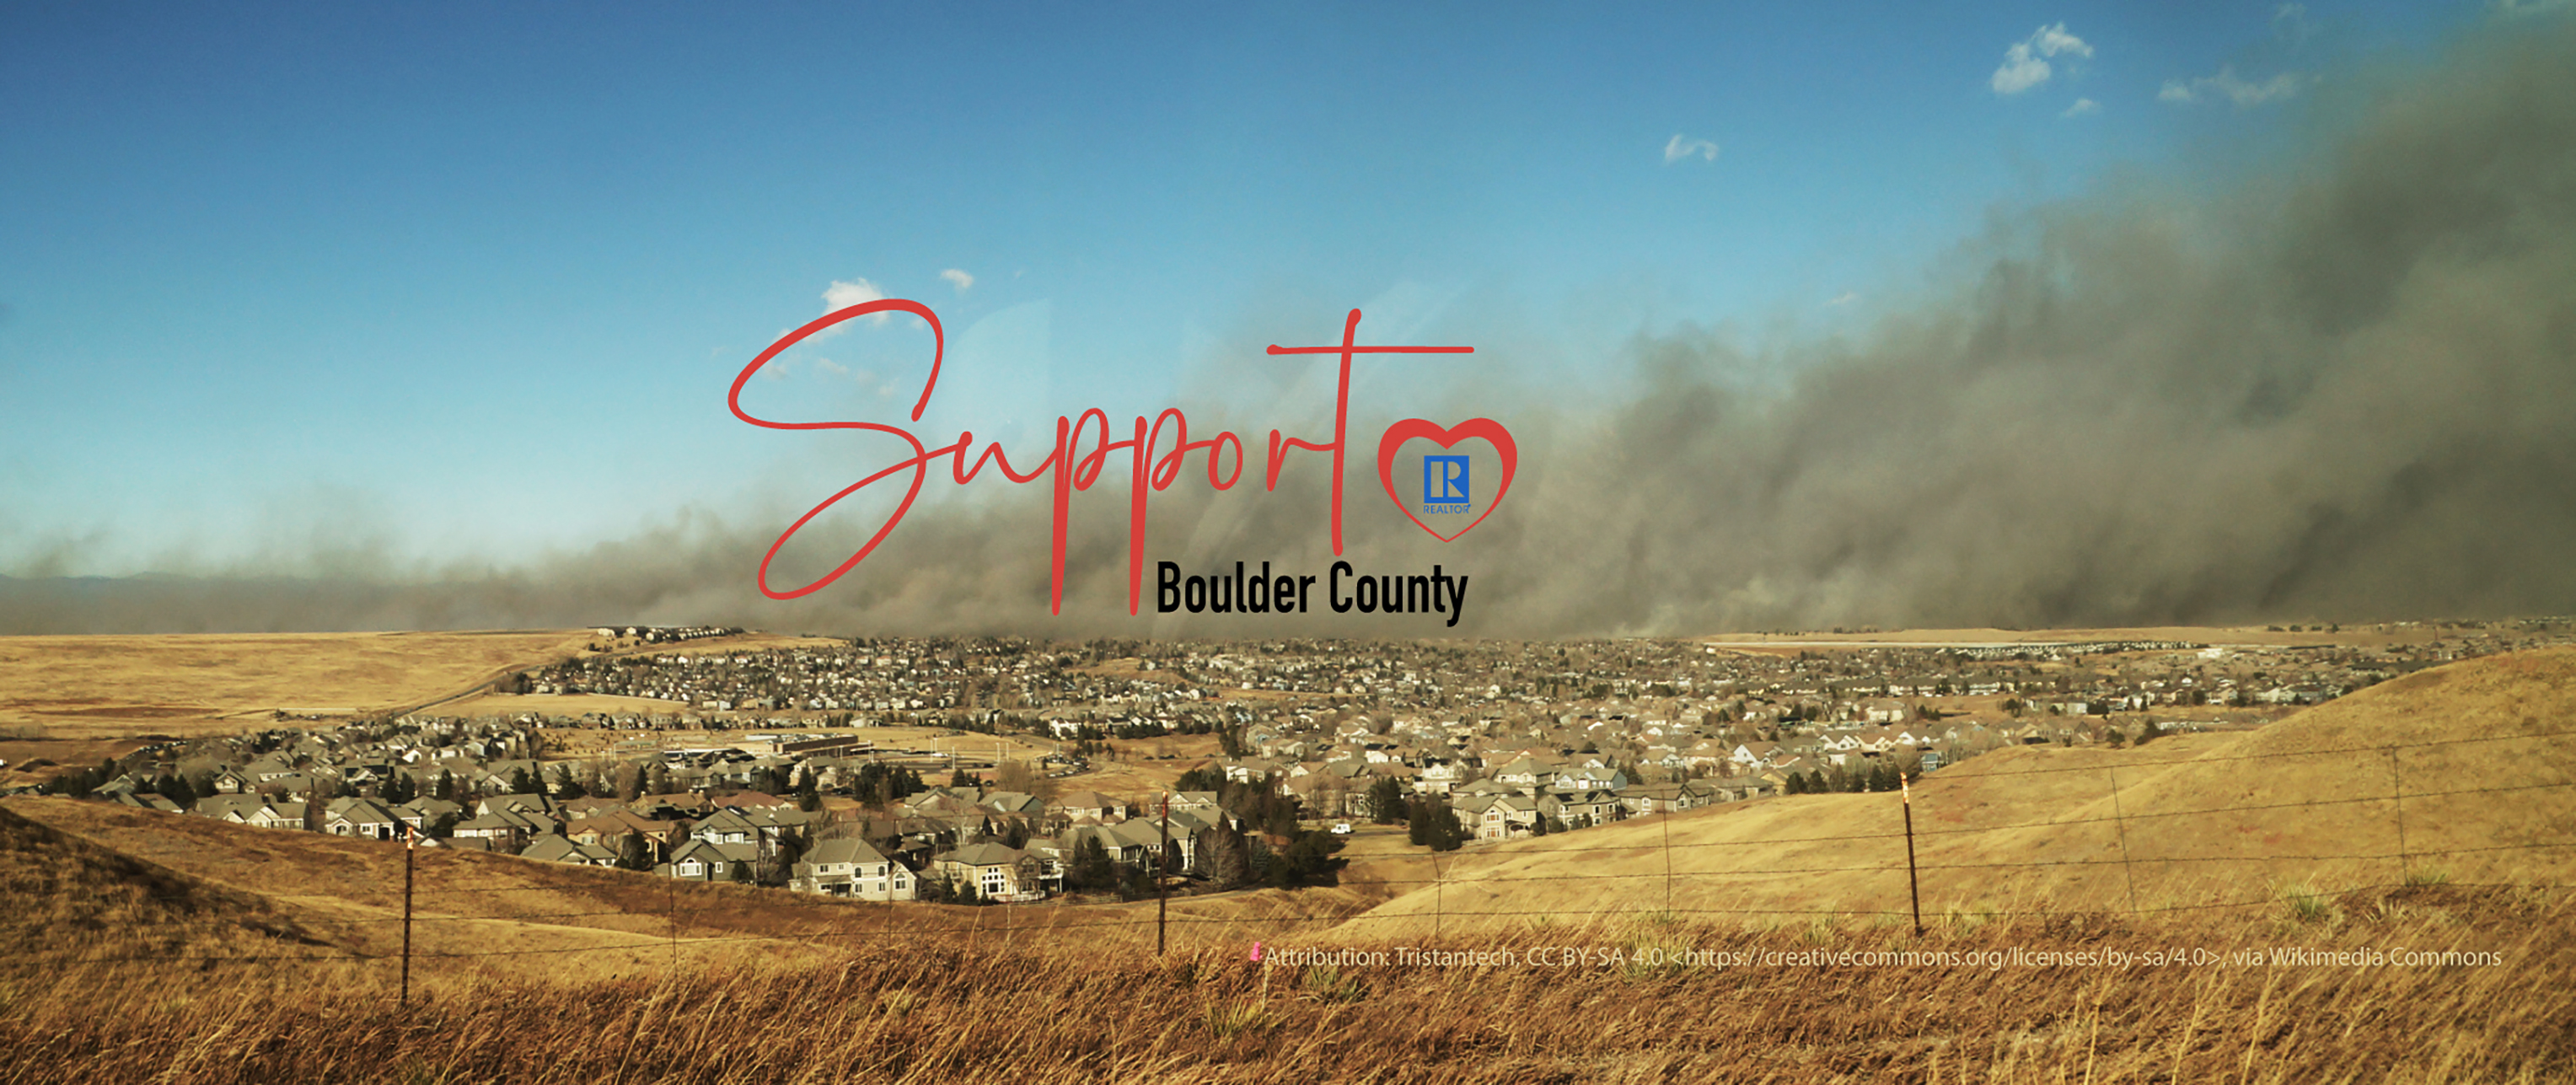 Boulder County Wildfire